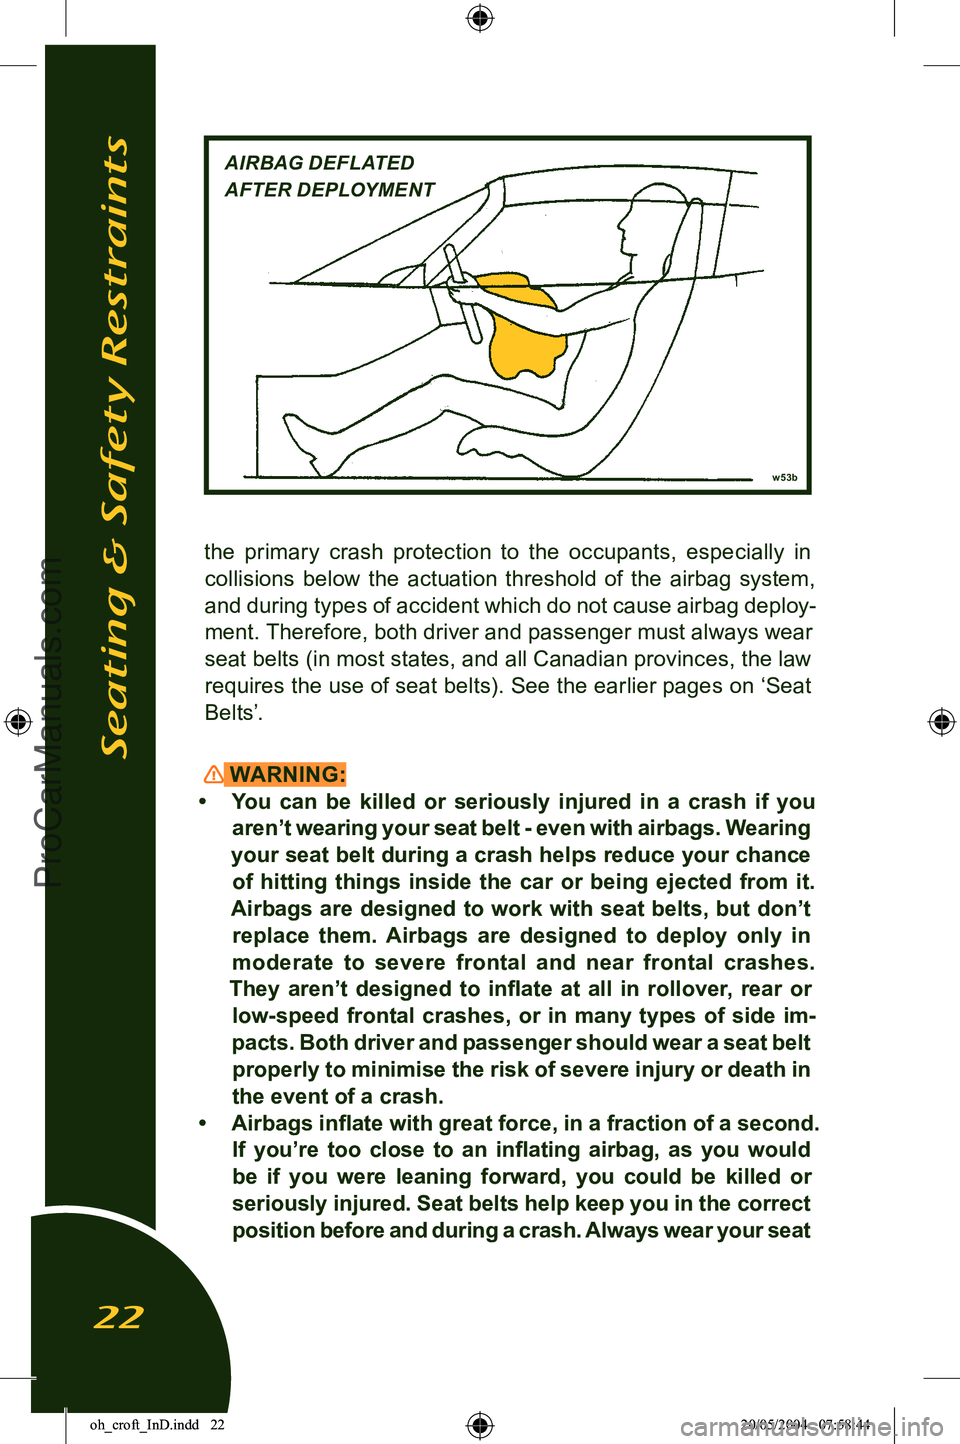 LOTUS ELISE 2005  Owners Manual 
the  primary  crash  protection  to  the  occupants,  especially  in collisions  below  the  actuation  threshold  of  the  airbag  system, and during types of accident which do not cause airbag depl